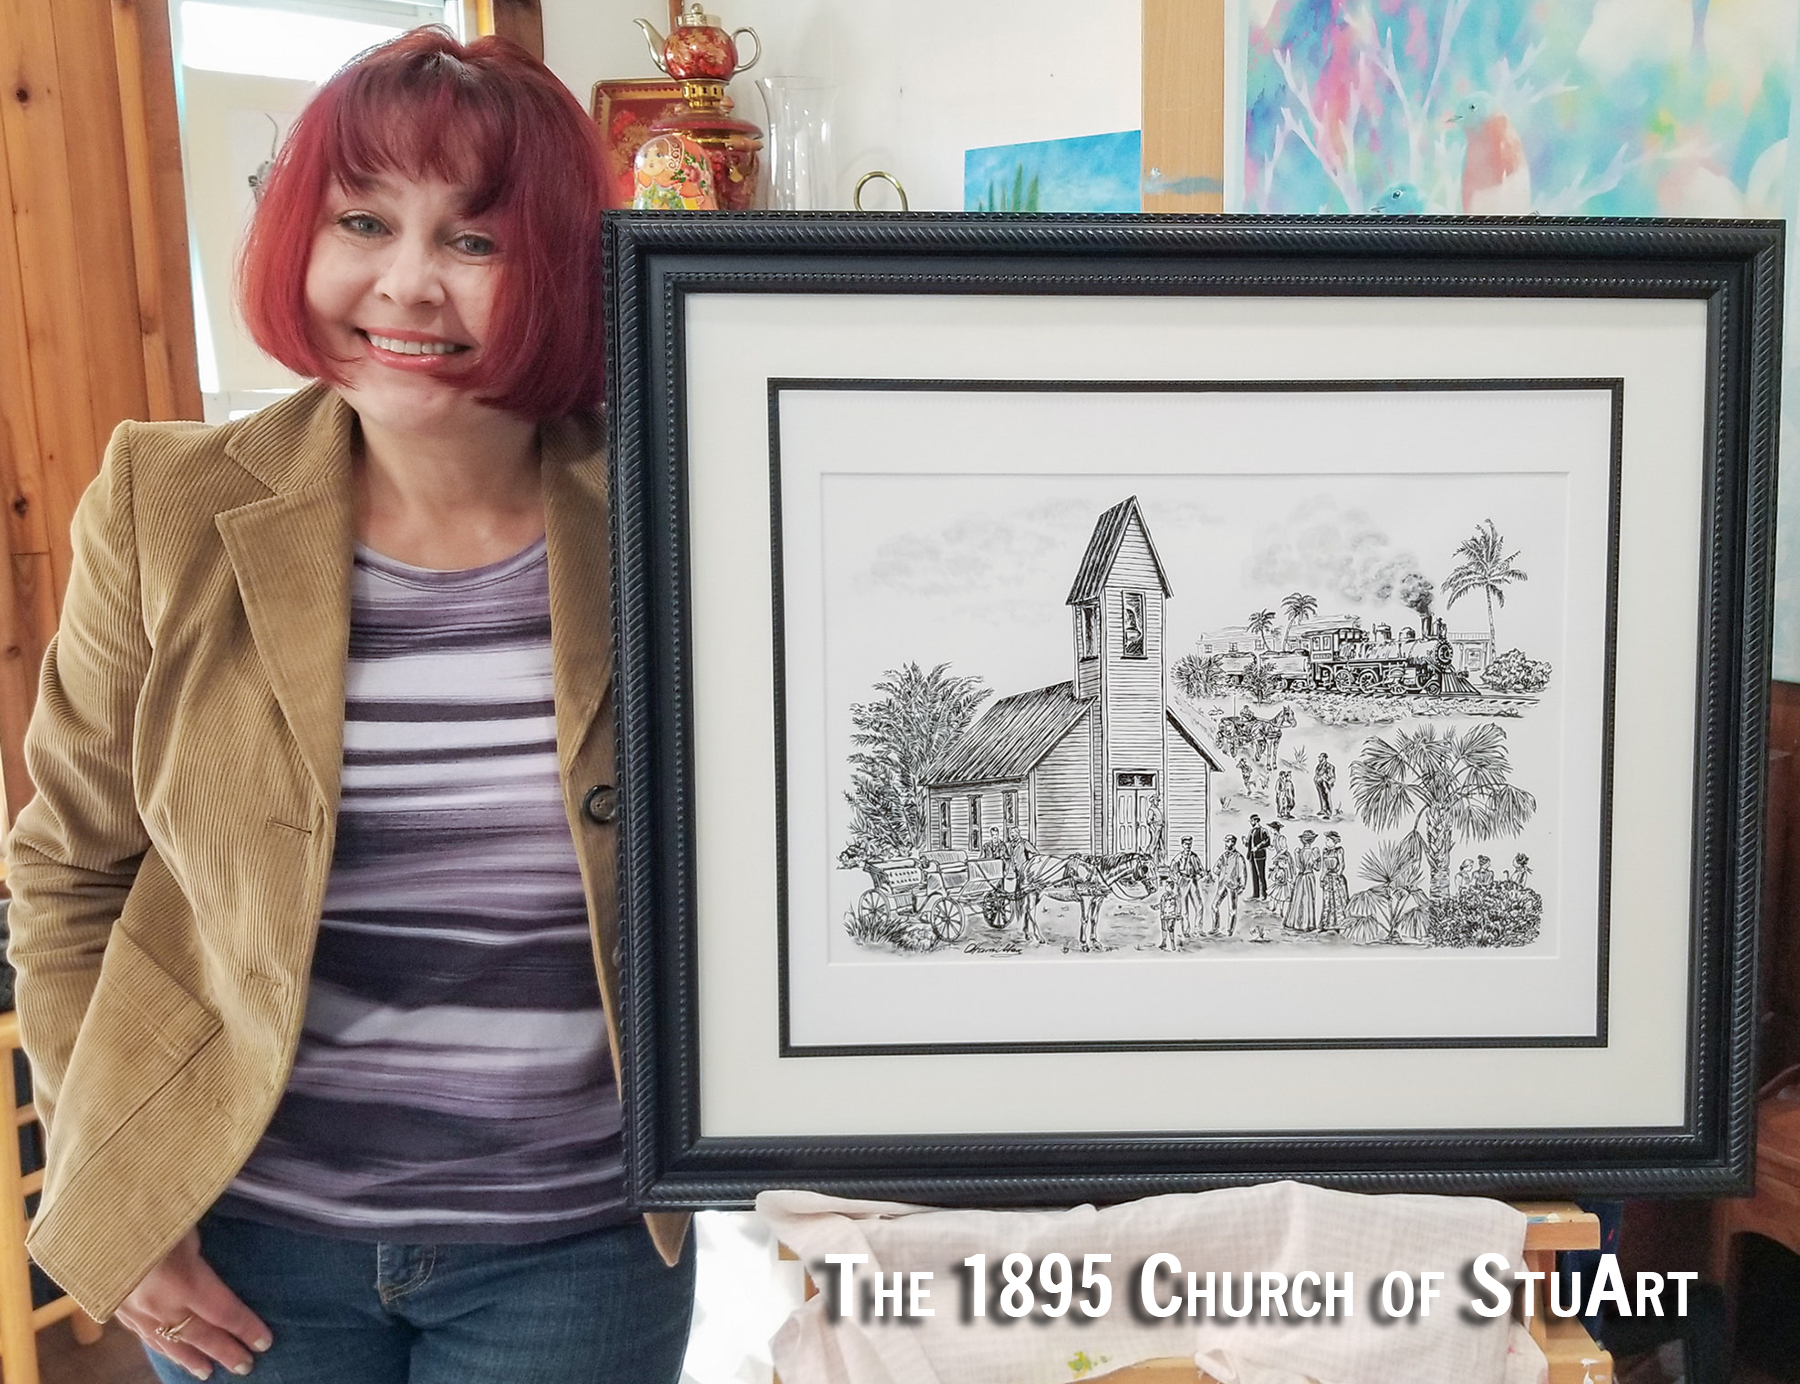 The 1895 Church of StuArt, the oldest church building located in what is now Martin County, Florida. Supporting Local History and Art. Historical Preservation, the City of Stuart, Martin County, Florida. Historical Building Tour. Olga Hamilton Fine Art for Sale